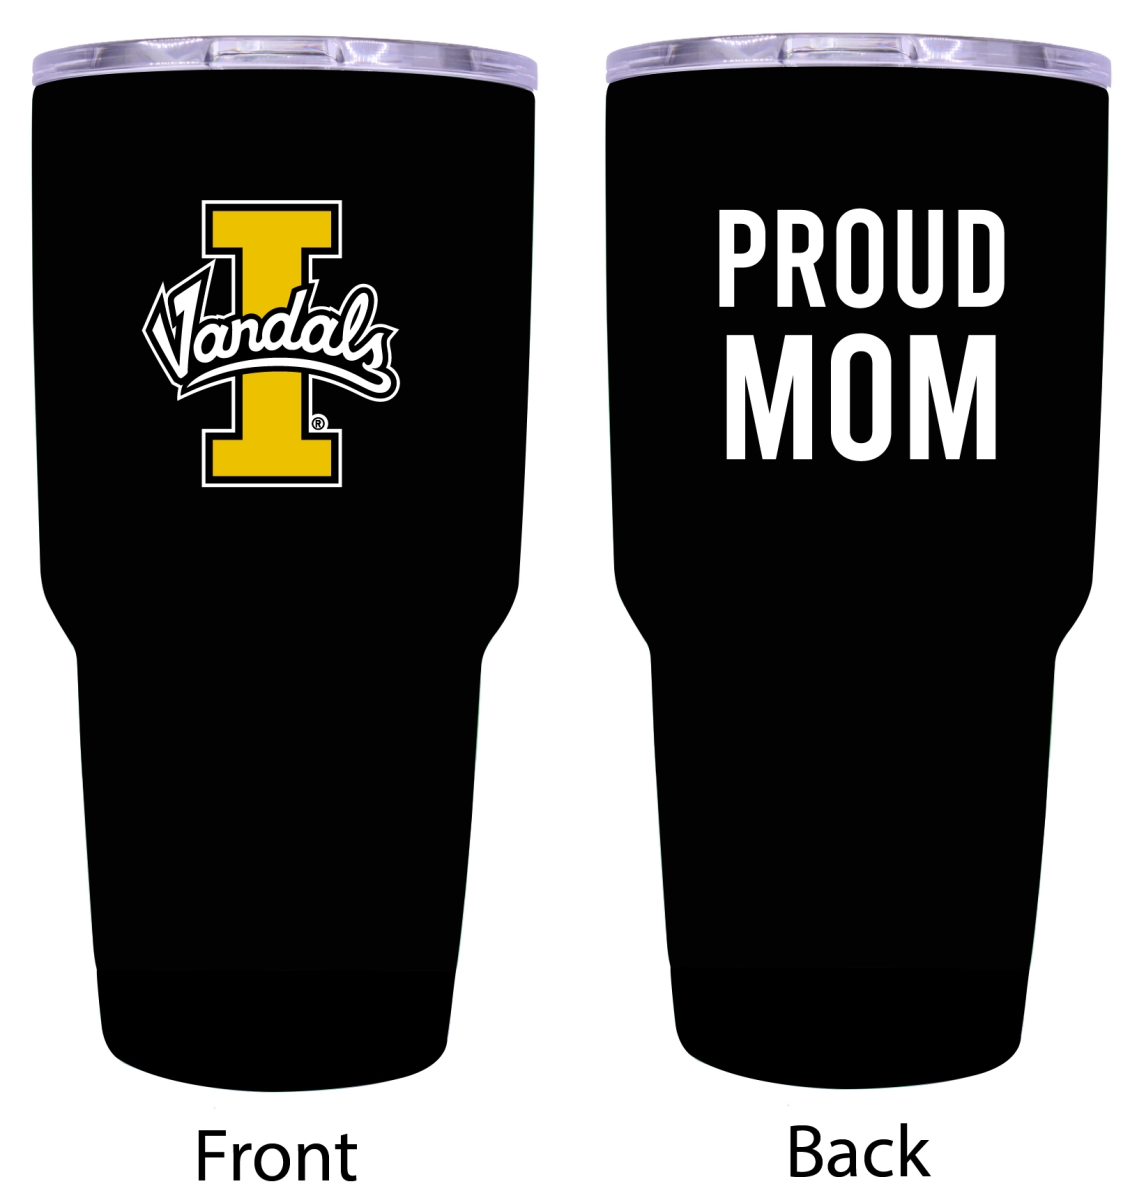 Picture of R & R Imports ITB-C-IDA20 MOM Idaho Vandals Proud Mom 20 oz Insulated Stainless Steel Tumblers